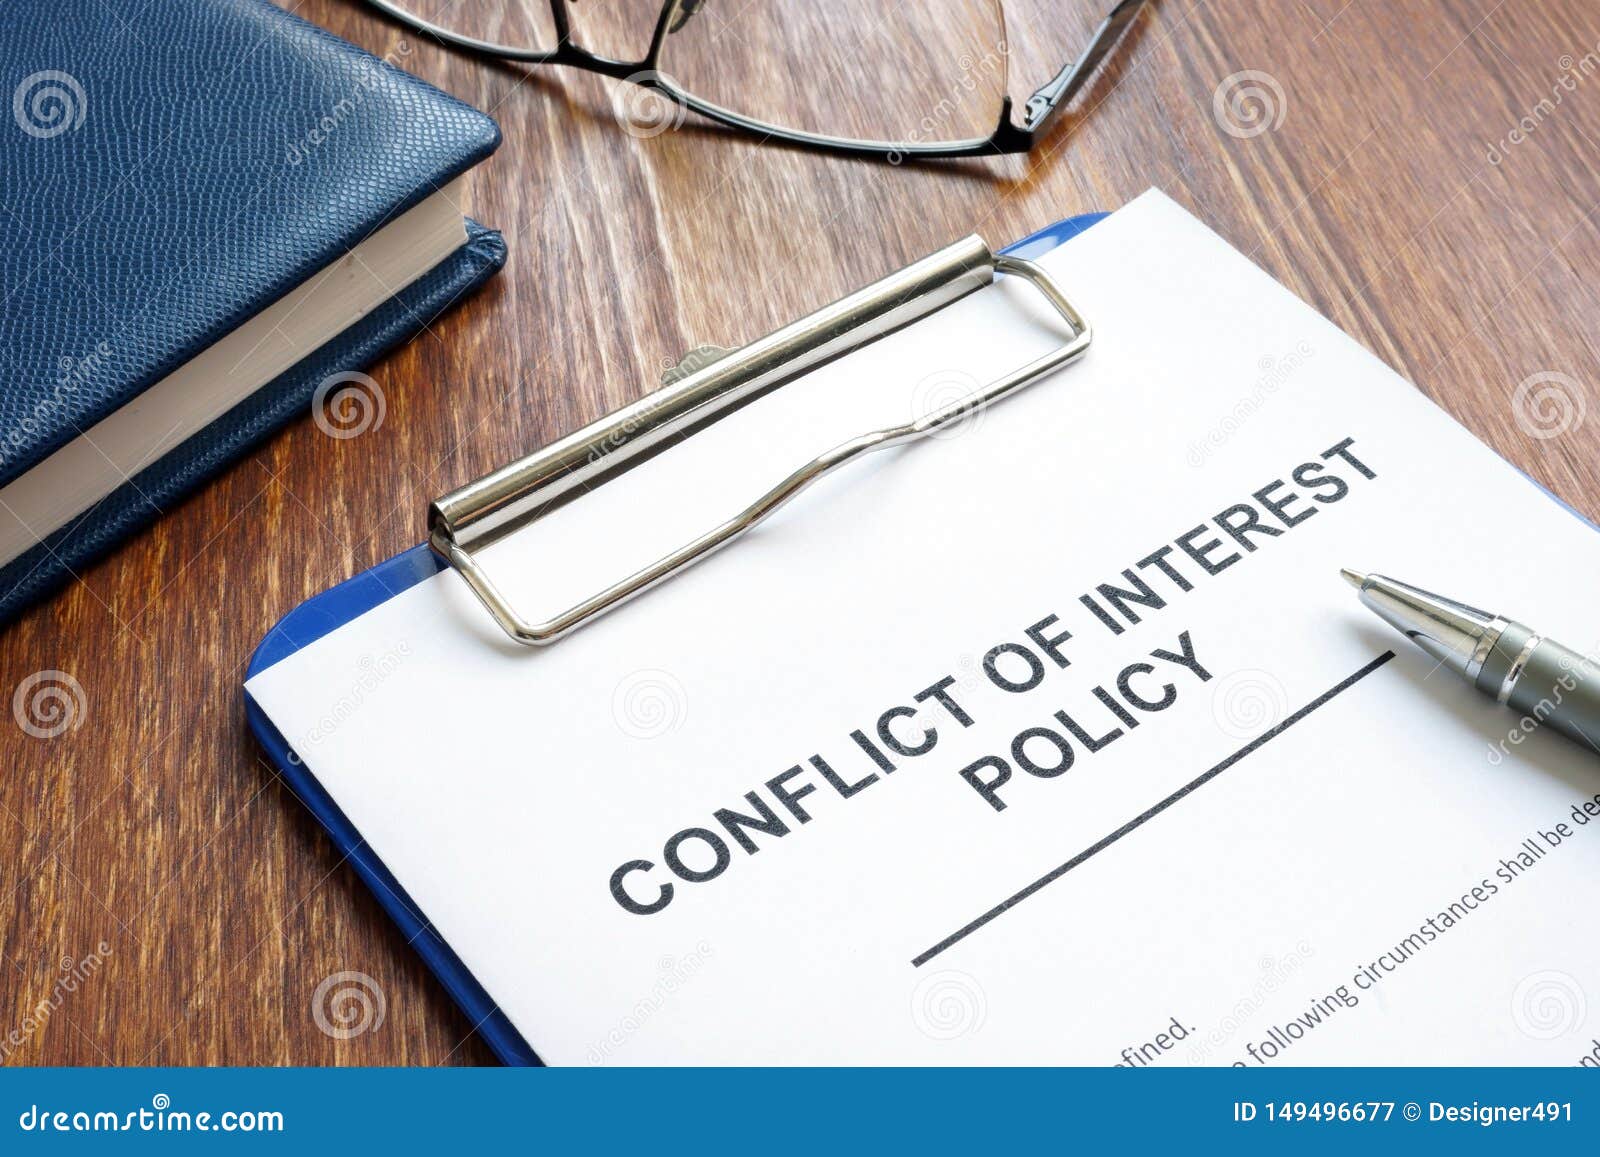 conflict of interest policy and pen on  wooden surface